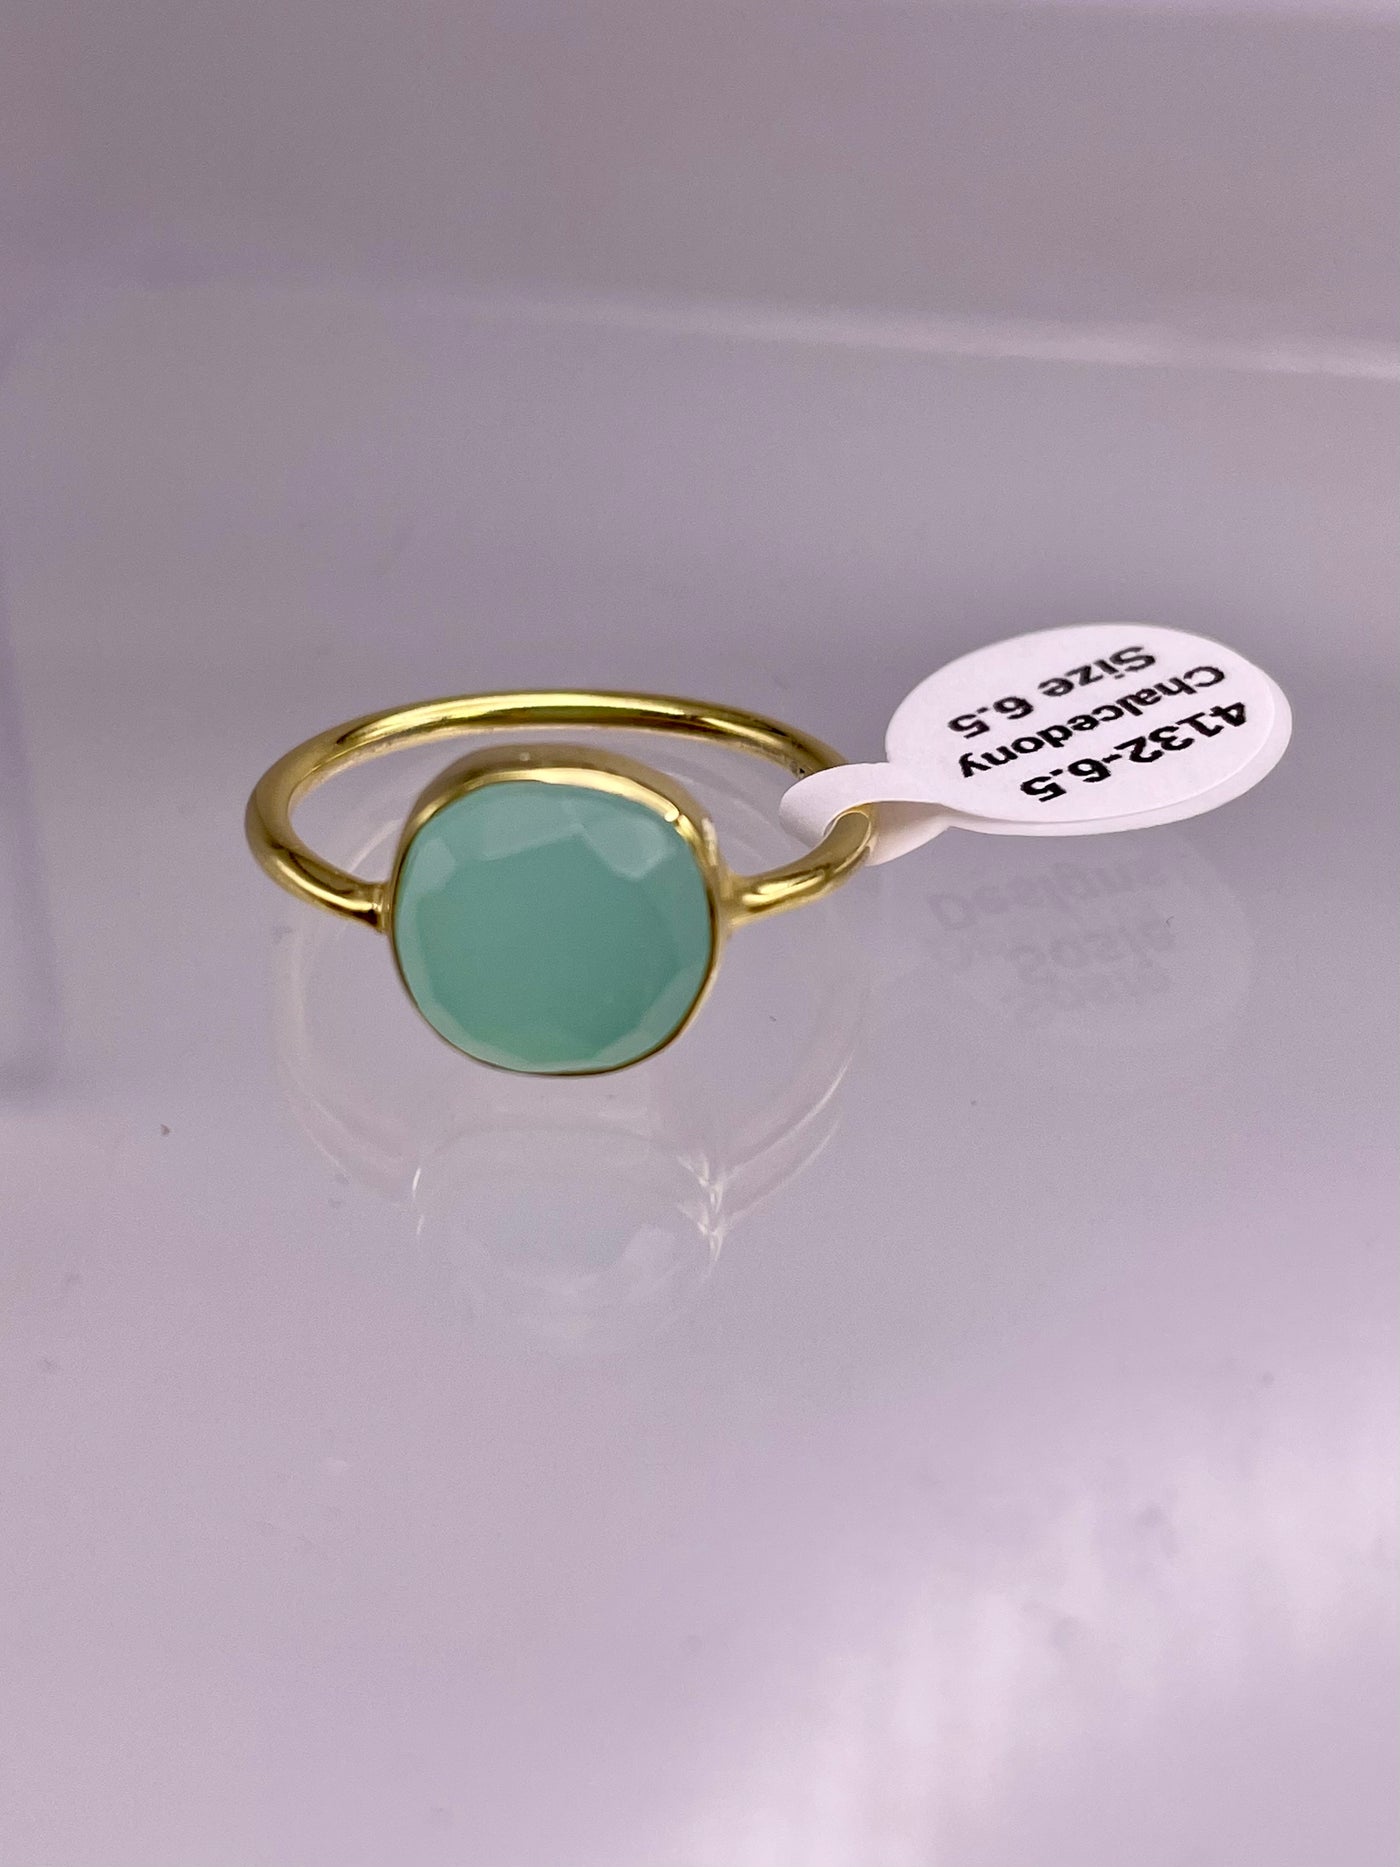 gold over silver aqua chalcedony ring cushion cut made in the USA small woman owned business made in the USA gold over sterling silver handmade. Modern smart causal female chic effortless outfit womens ladies gift elegant effortless clothing clothes apparel outfits chic summer style women’s boutique trendy cute plus size wedding guest outfit